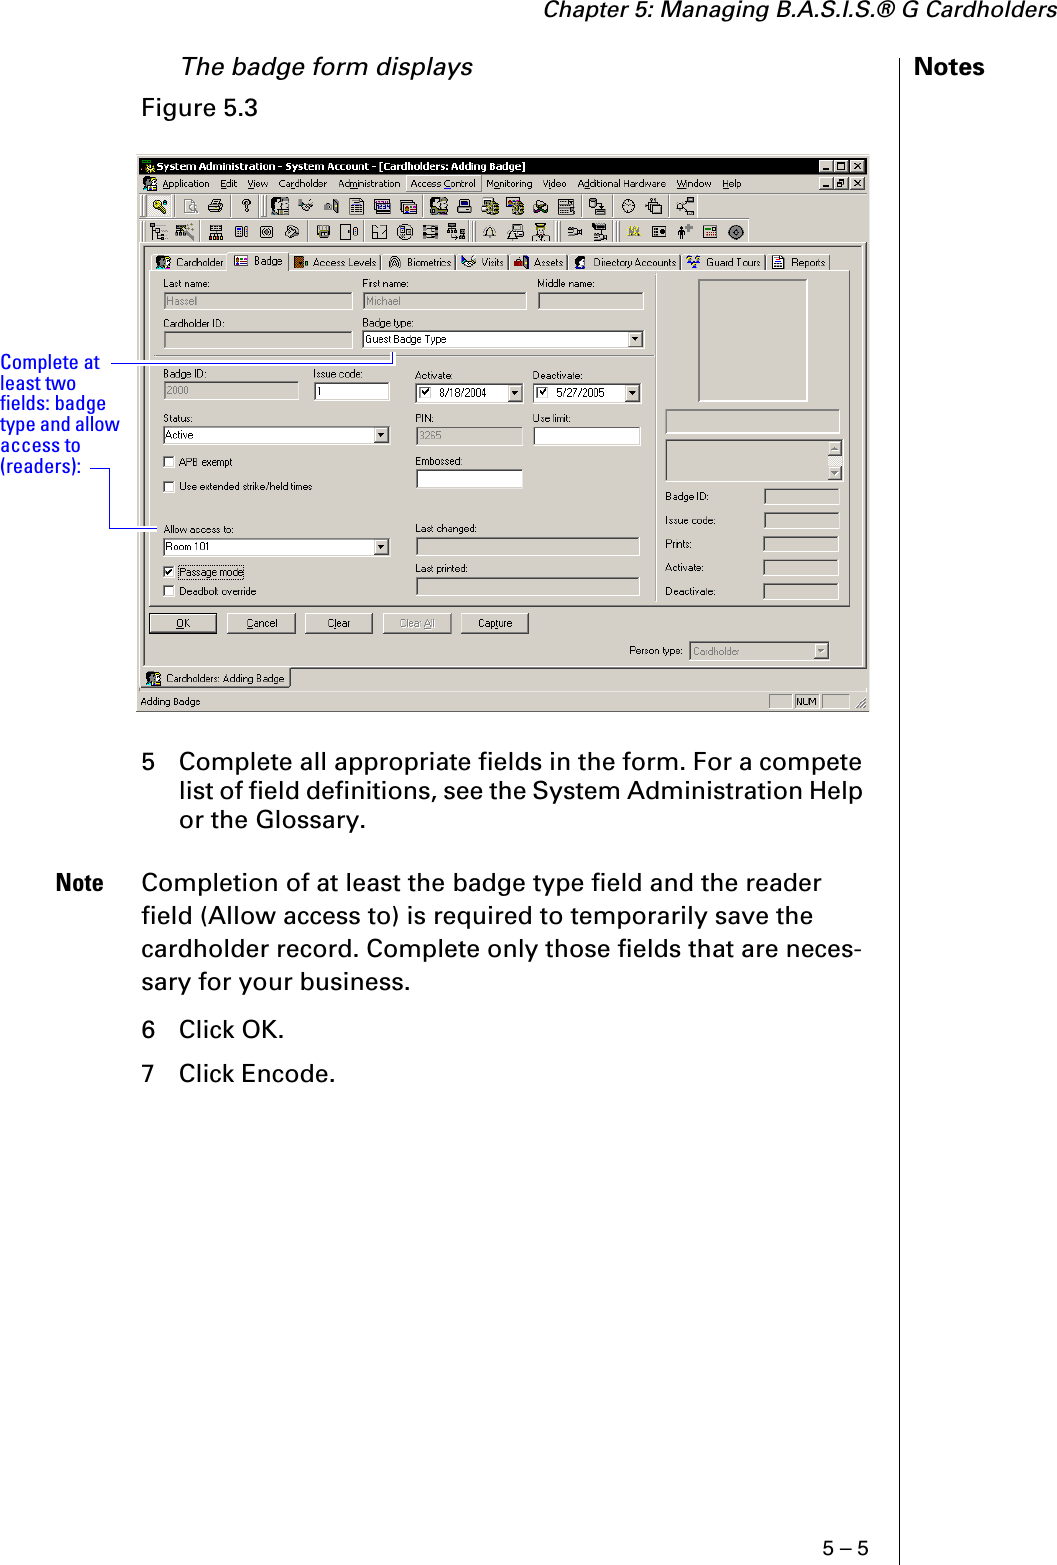 Chapter 5: Managing B.A.S.I.S.® G Cardholders5 – 5NotesThe badge form displays 5 Complete all appropriate fields in the form. For a compete list of field definitions, see the System Administration Help or the Glossary.Note Completion of at least the badge type field and the reader field (Allow access to) is required to temporarily save the cardholder record. Complete only those fields that are neces-sary for your business.6 Click OK.7 Click Encode.Figure 5.3  Complete at least two fields: badge type and allow access to (readers):